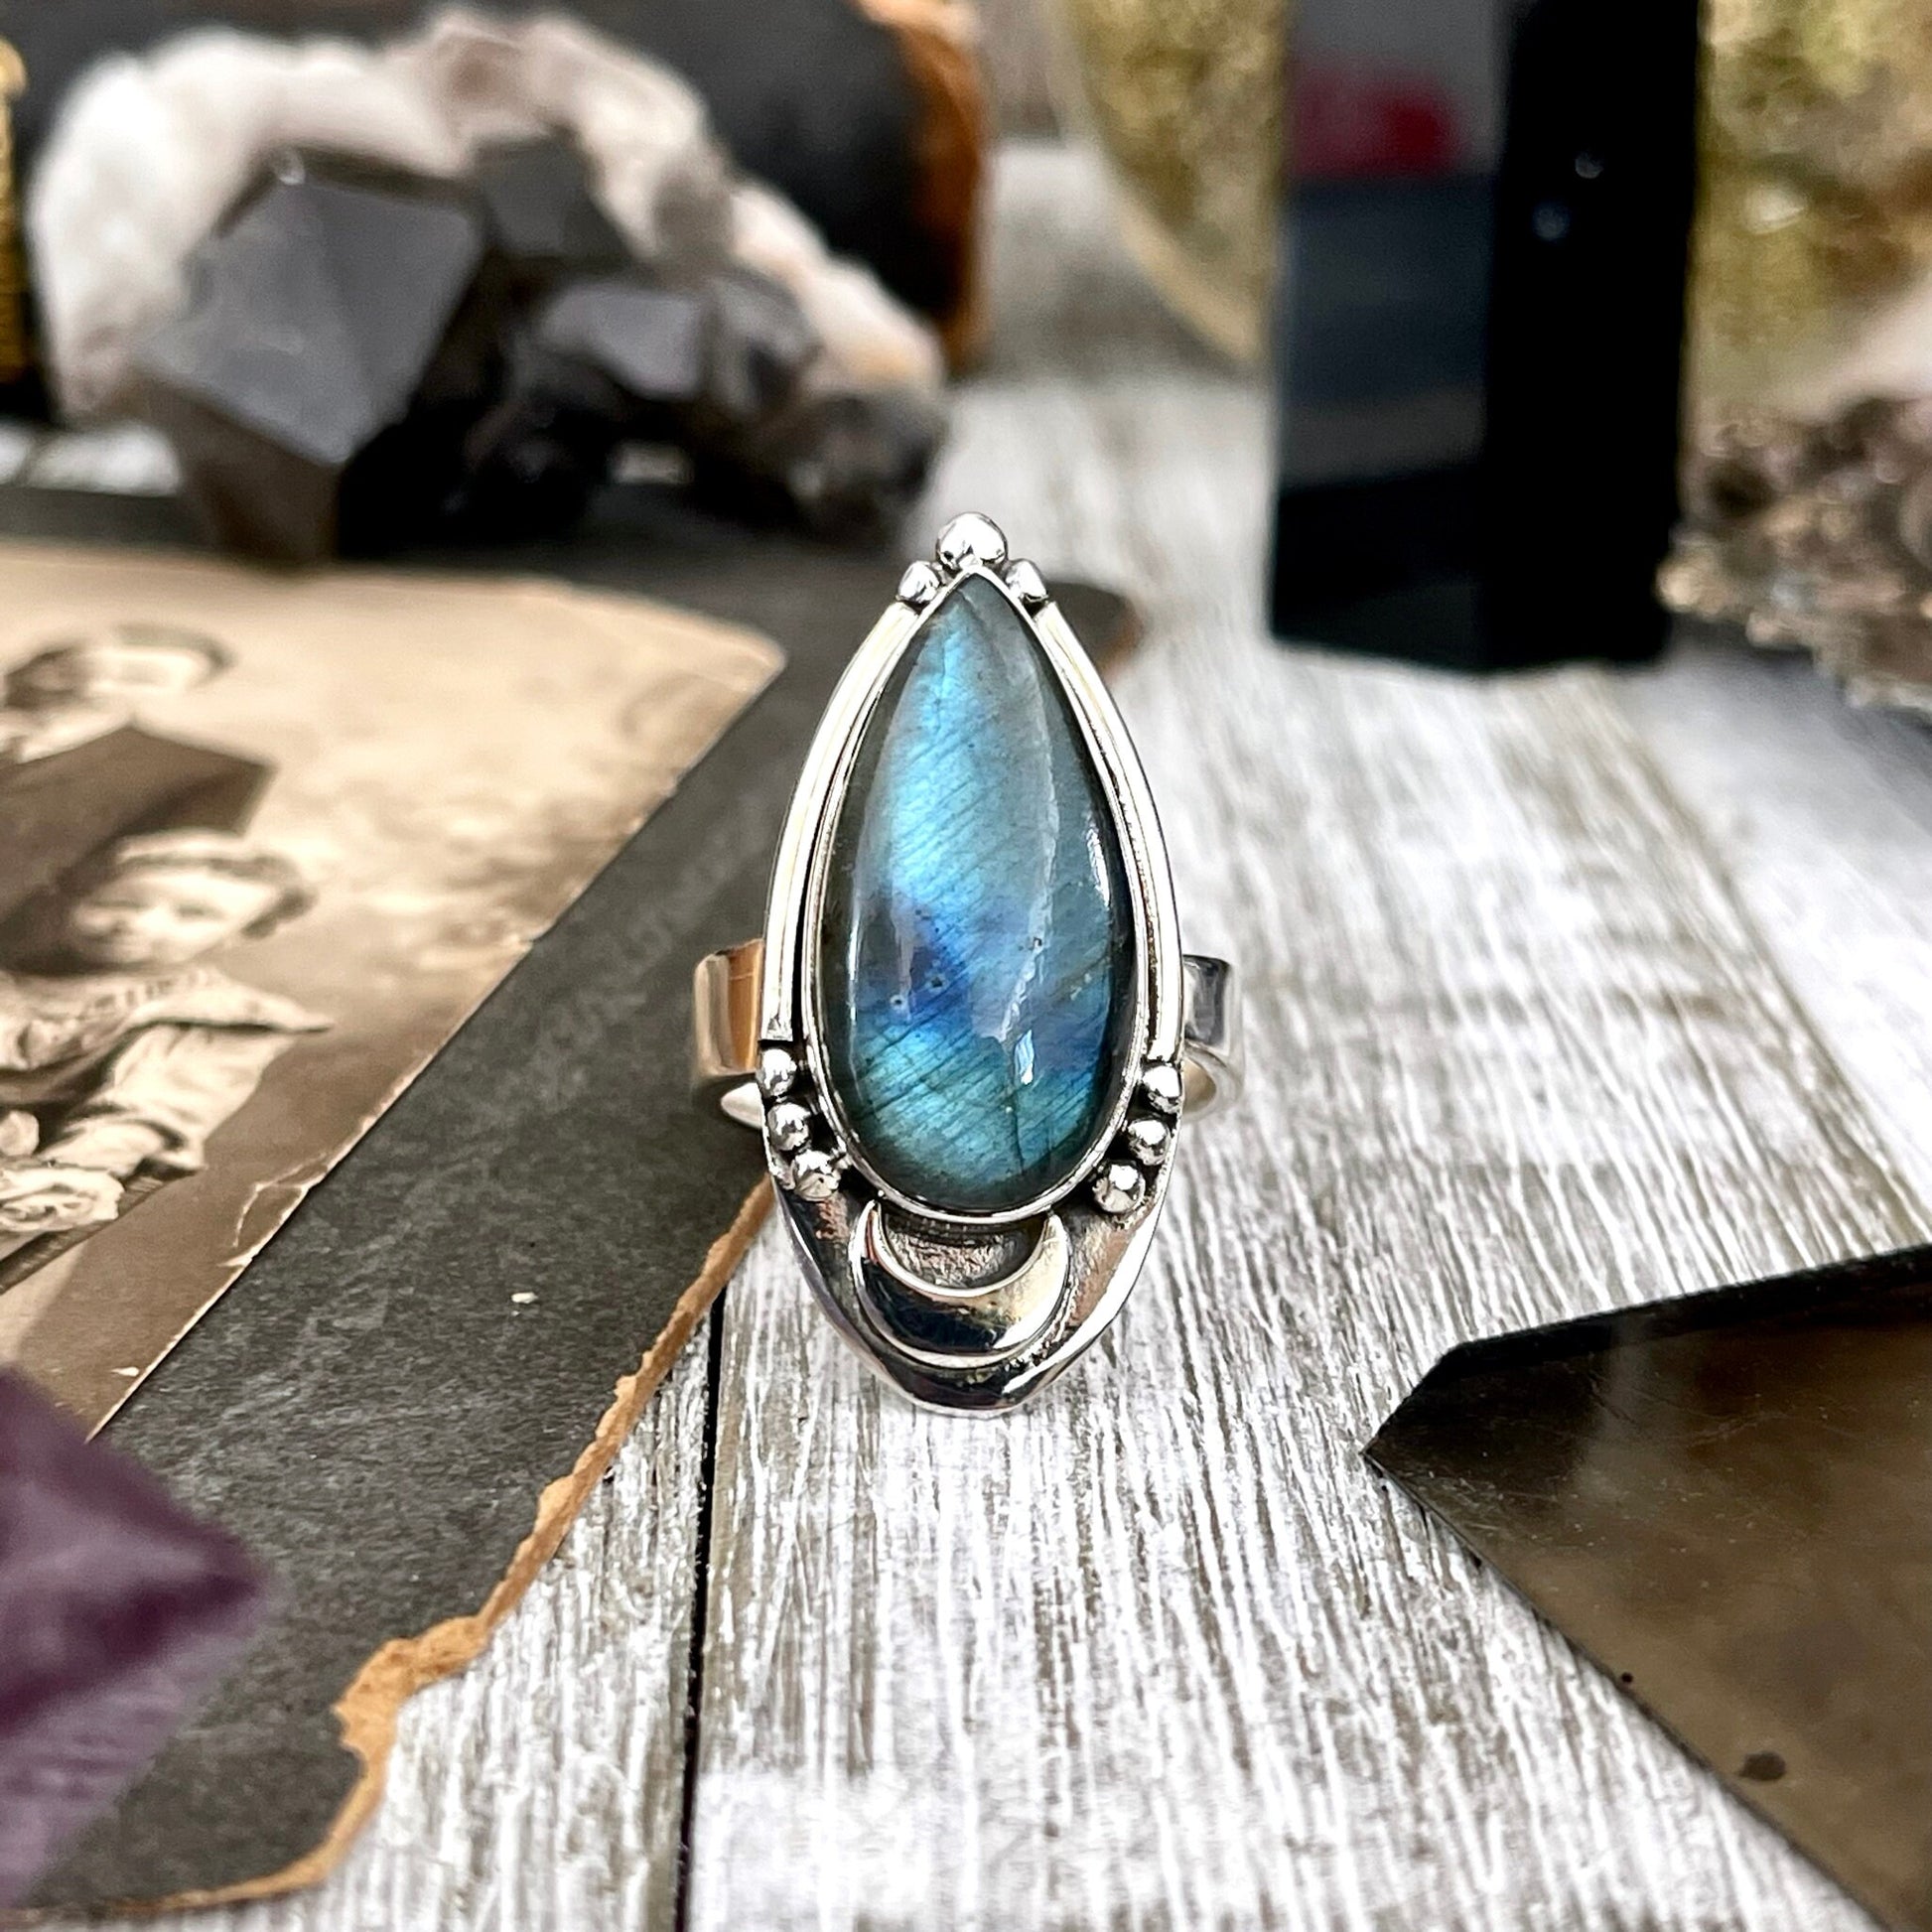 Midnight Moon Labradorite Teardrop Crystal Ring in Sterling Silver- Designed by FOXLARK Collection Adjustable to Size 6 7 8 9